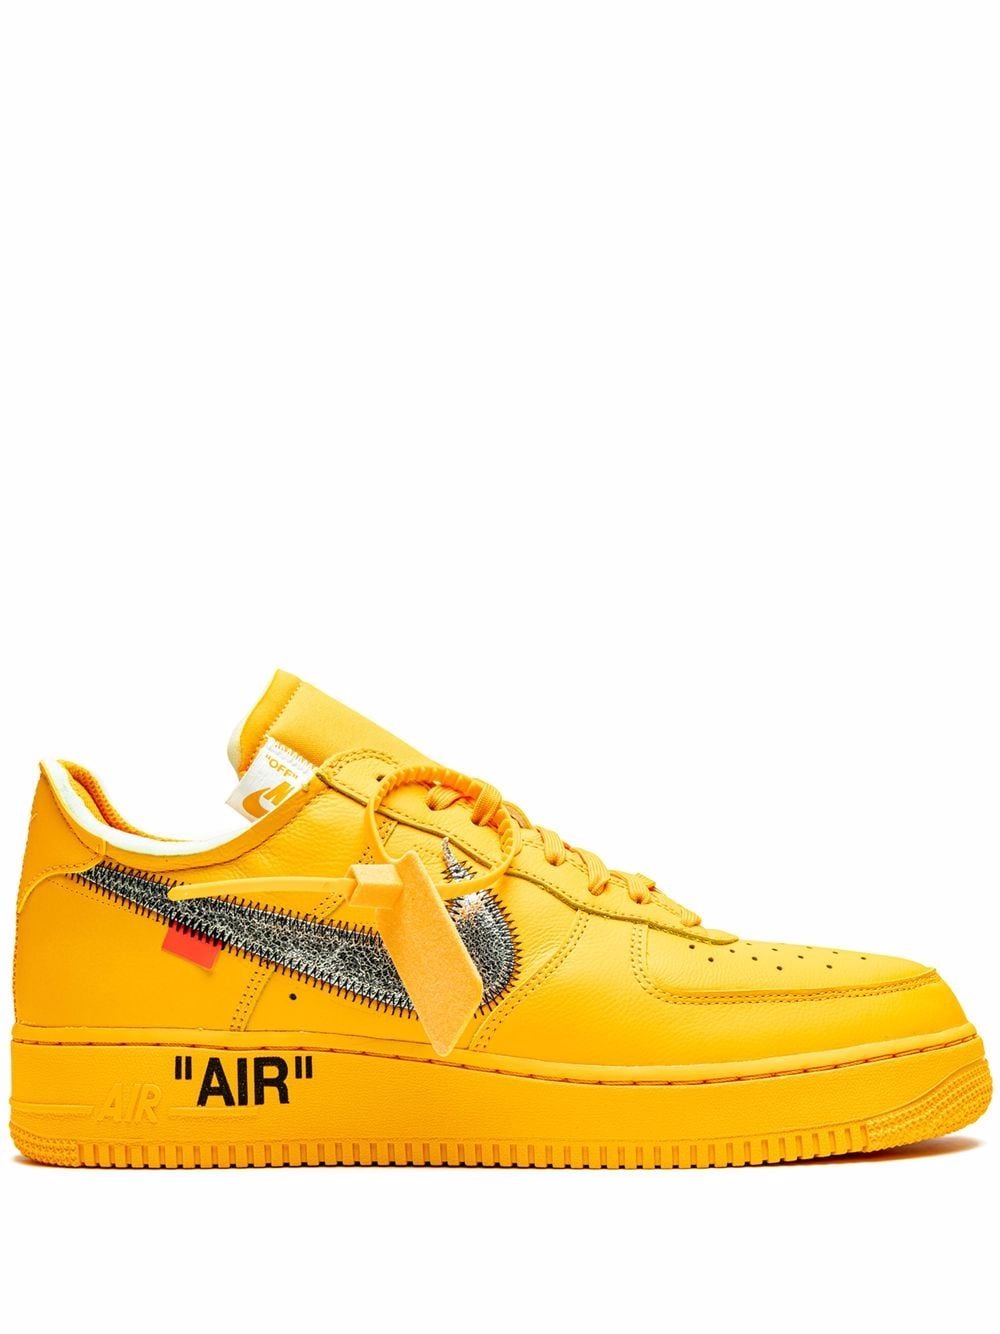 Nike X Off-White Air Force 1 Low "University Gold" sneakers - Yellow von Nike X Off-White